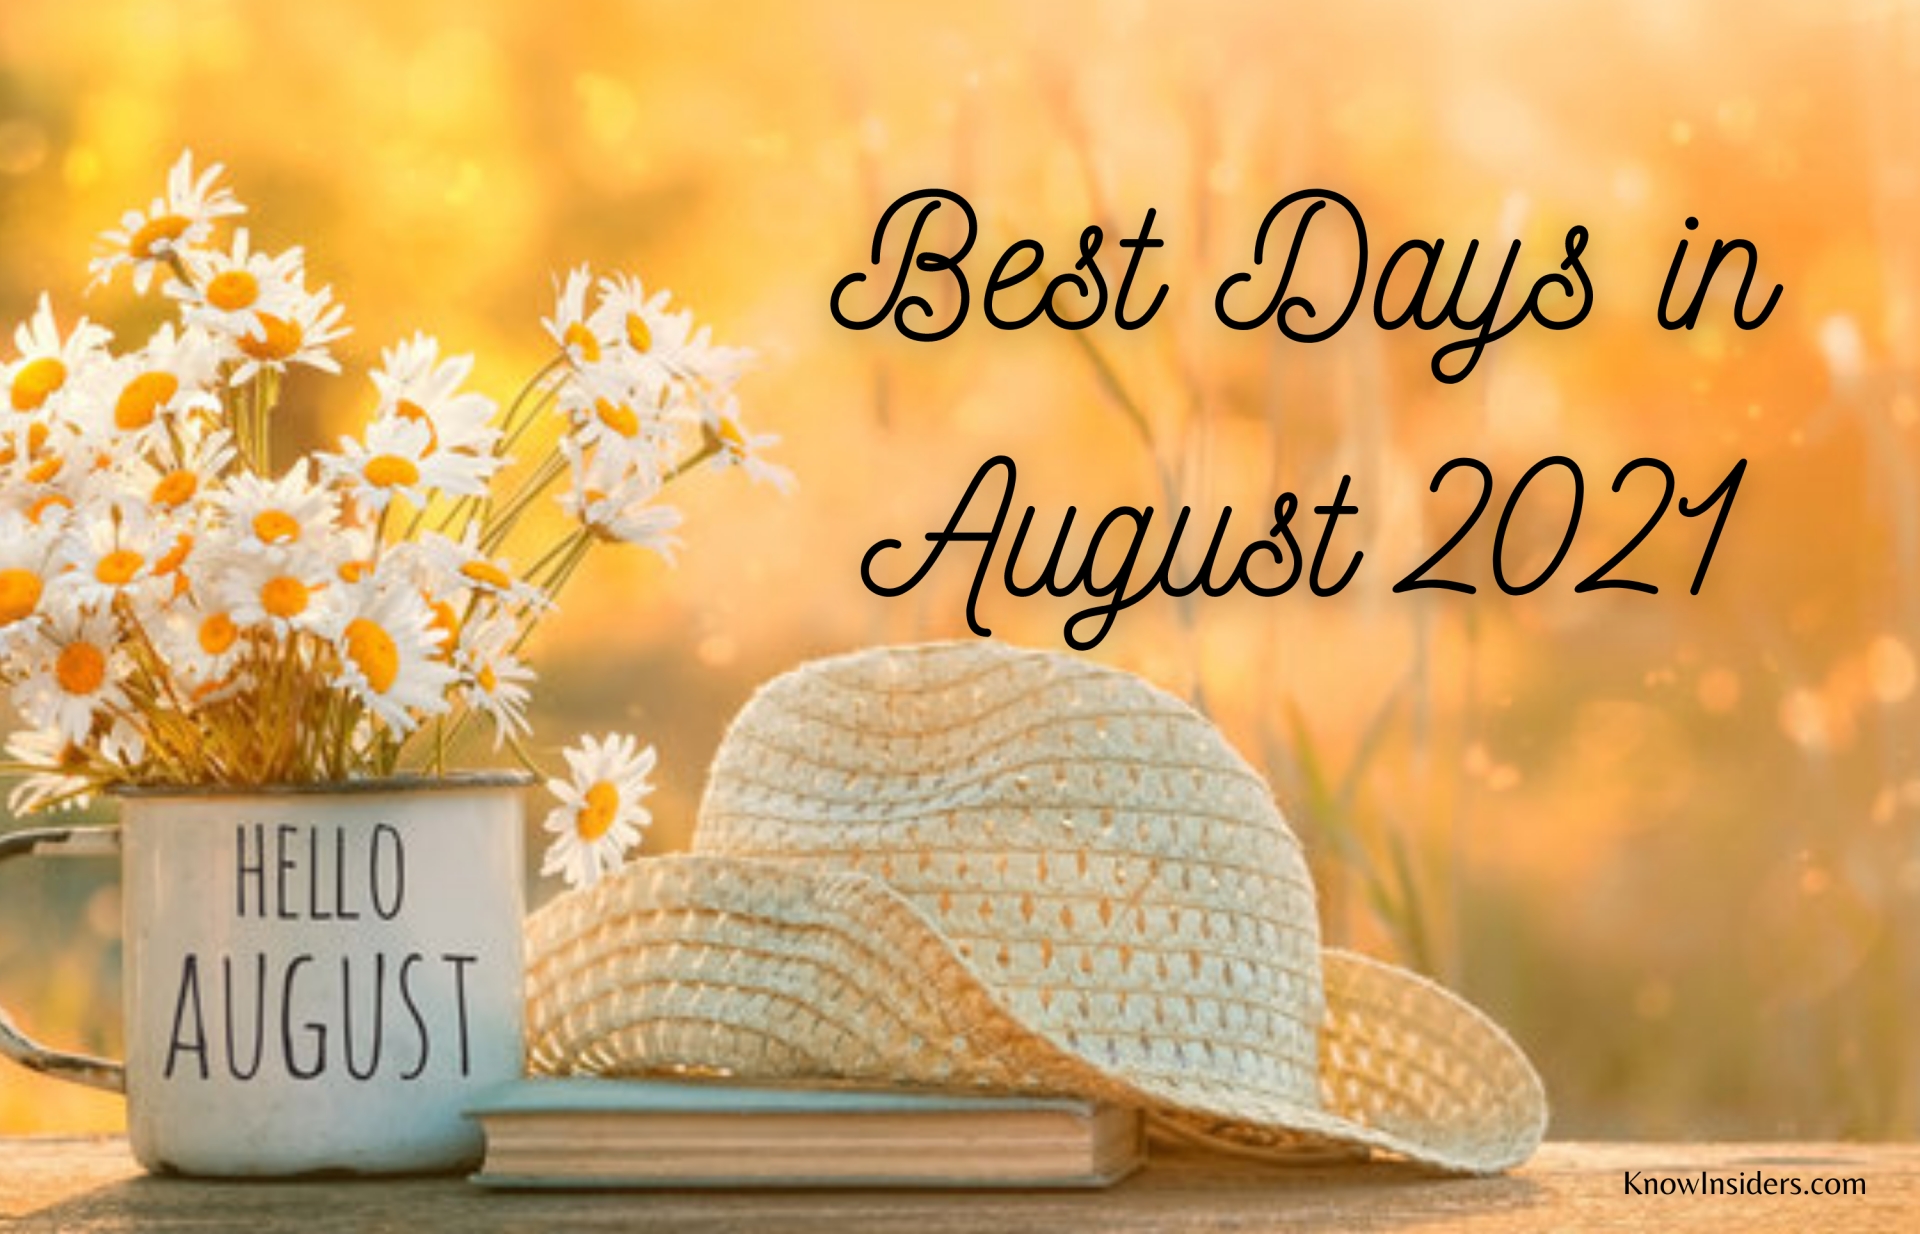 The Best Days in August by Activities